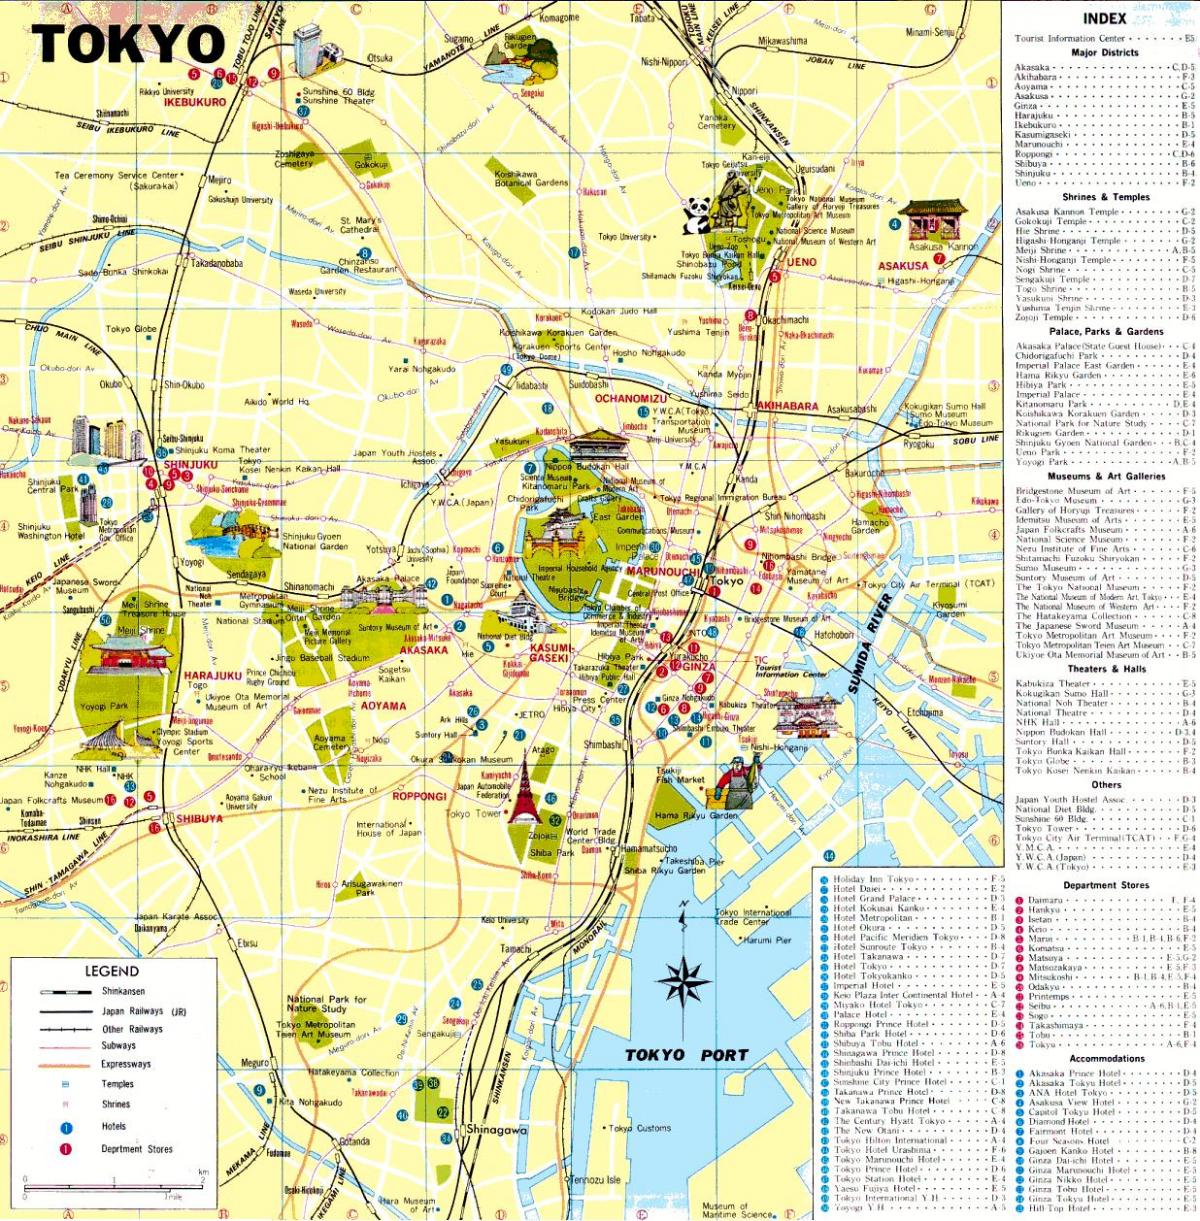 Tokyo tourist attractions map